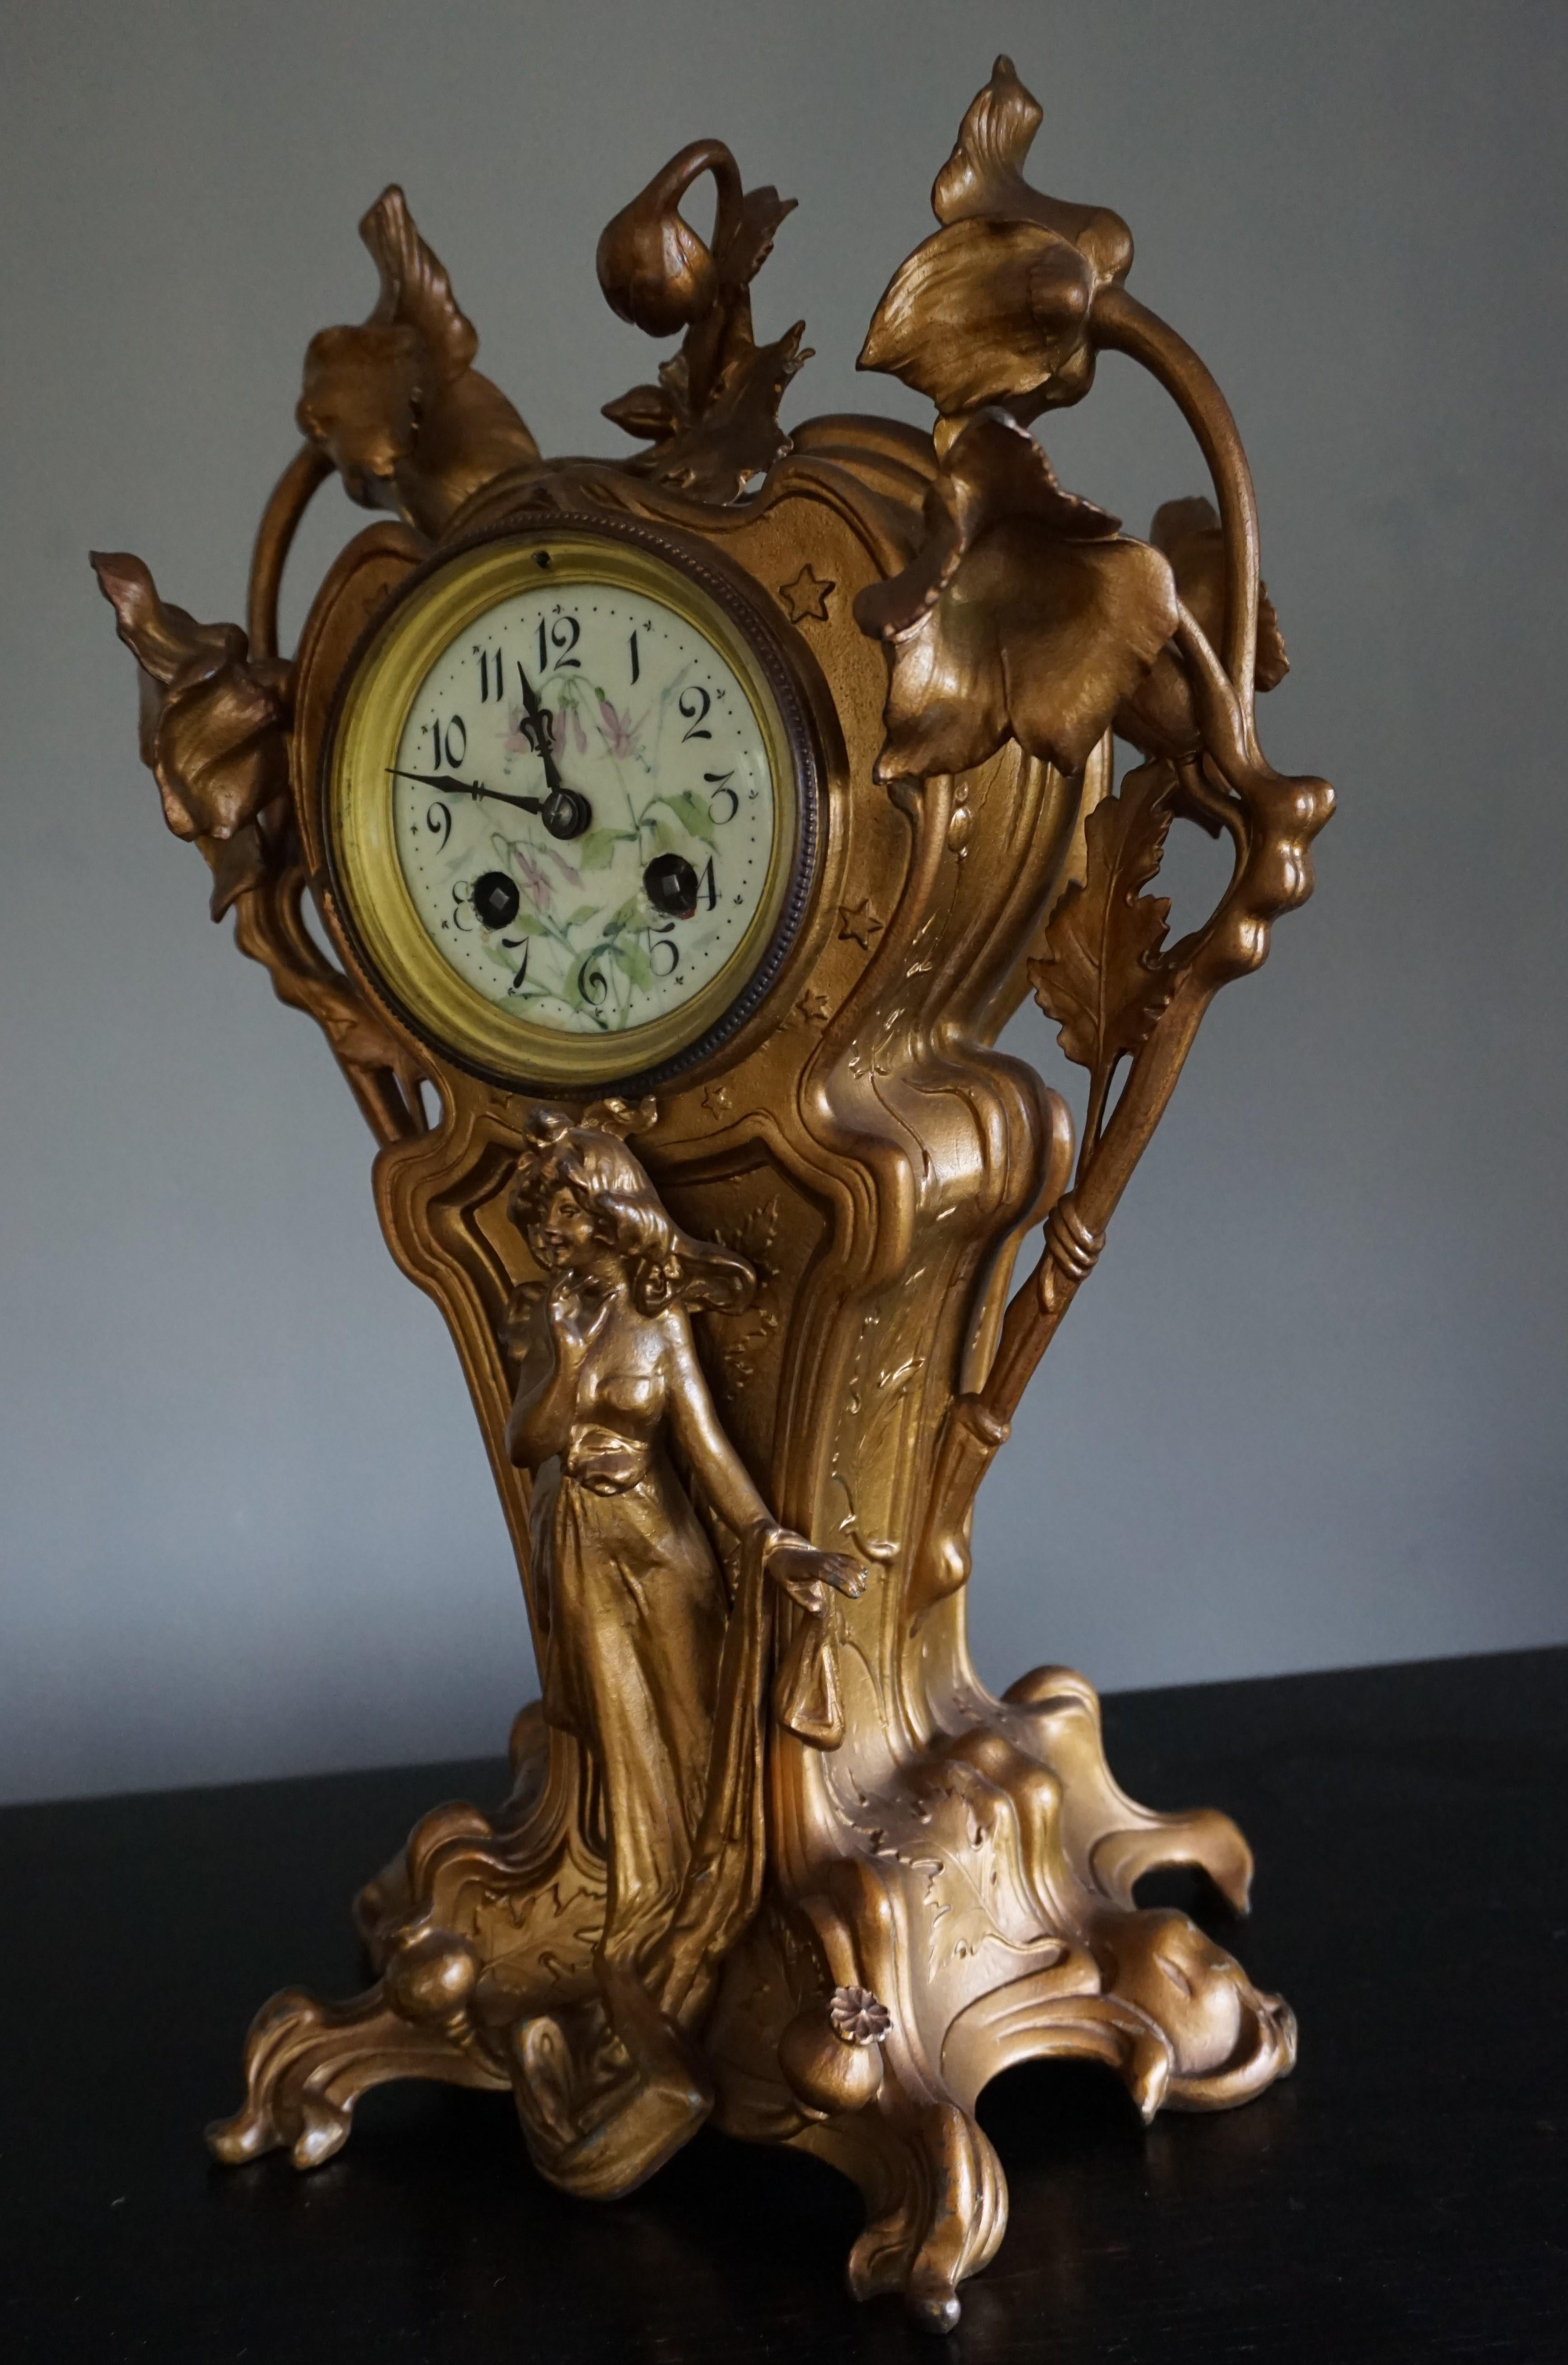 Rare Art Nouveau clock with an elegant lady sculpture.

This pure Art Nouveau clock from circa 1900-1910 has the most elegant of designs. This work of time telling art comes with a truly elegant, French lady sculpture and everything about her is